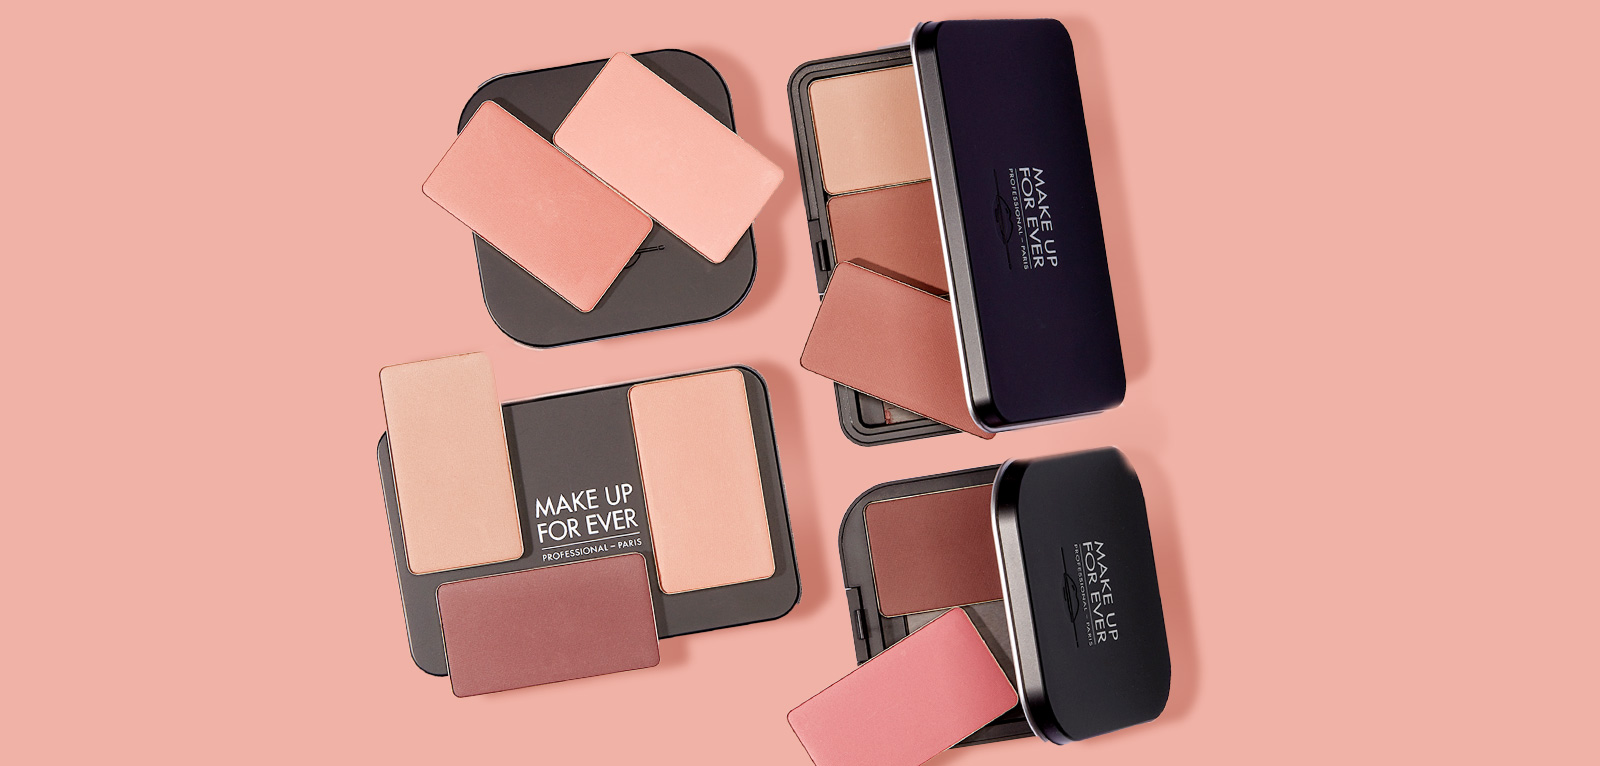 Discover our best-selling Artist Face Colors and build your custom highlight, blush, and contour palette.